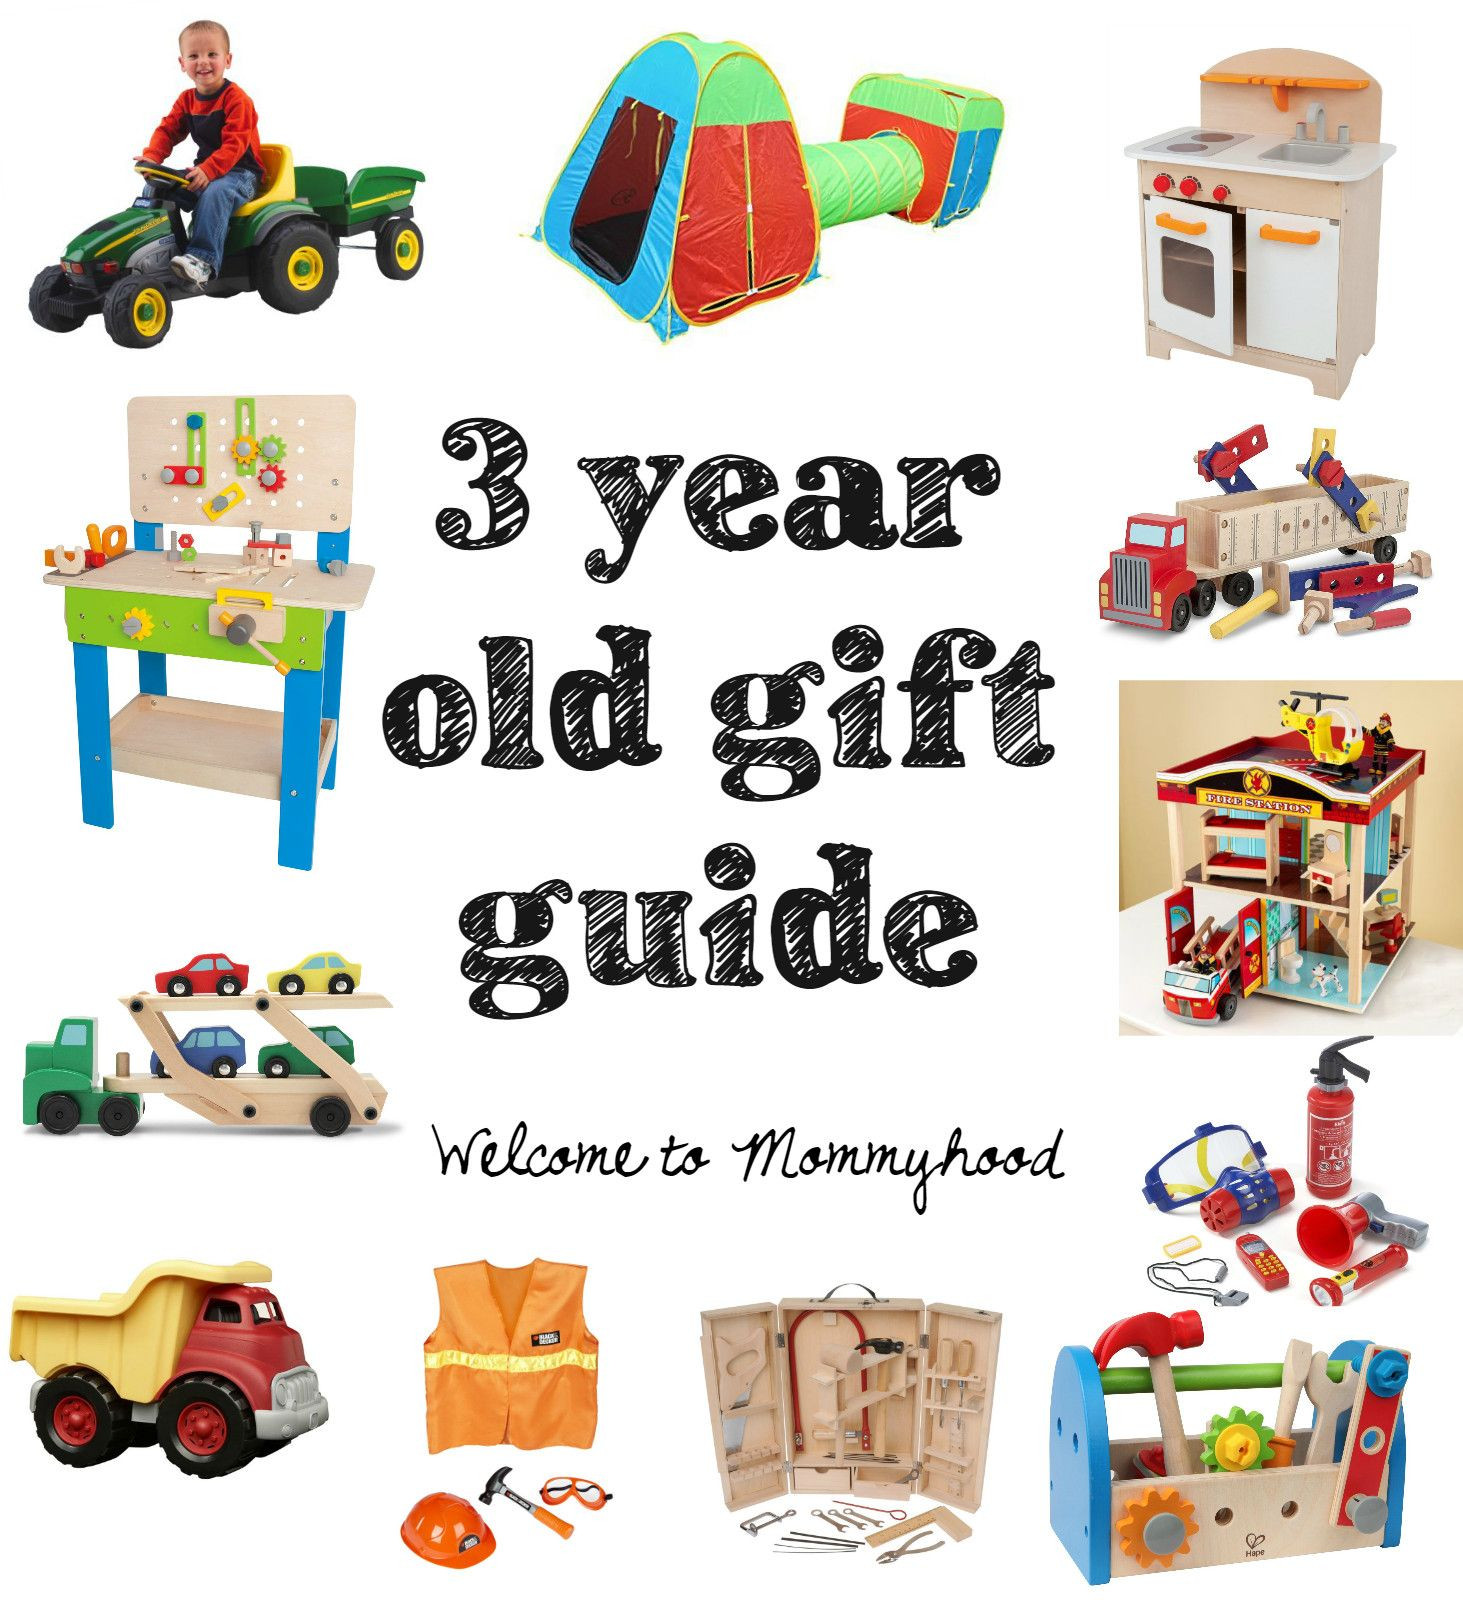 3 Year Old Gift Ideas Boys
 The 20 Best Ideas for Birthday Gifts for 3 Year Old Boy